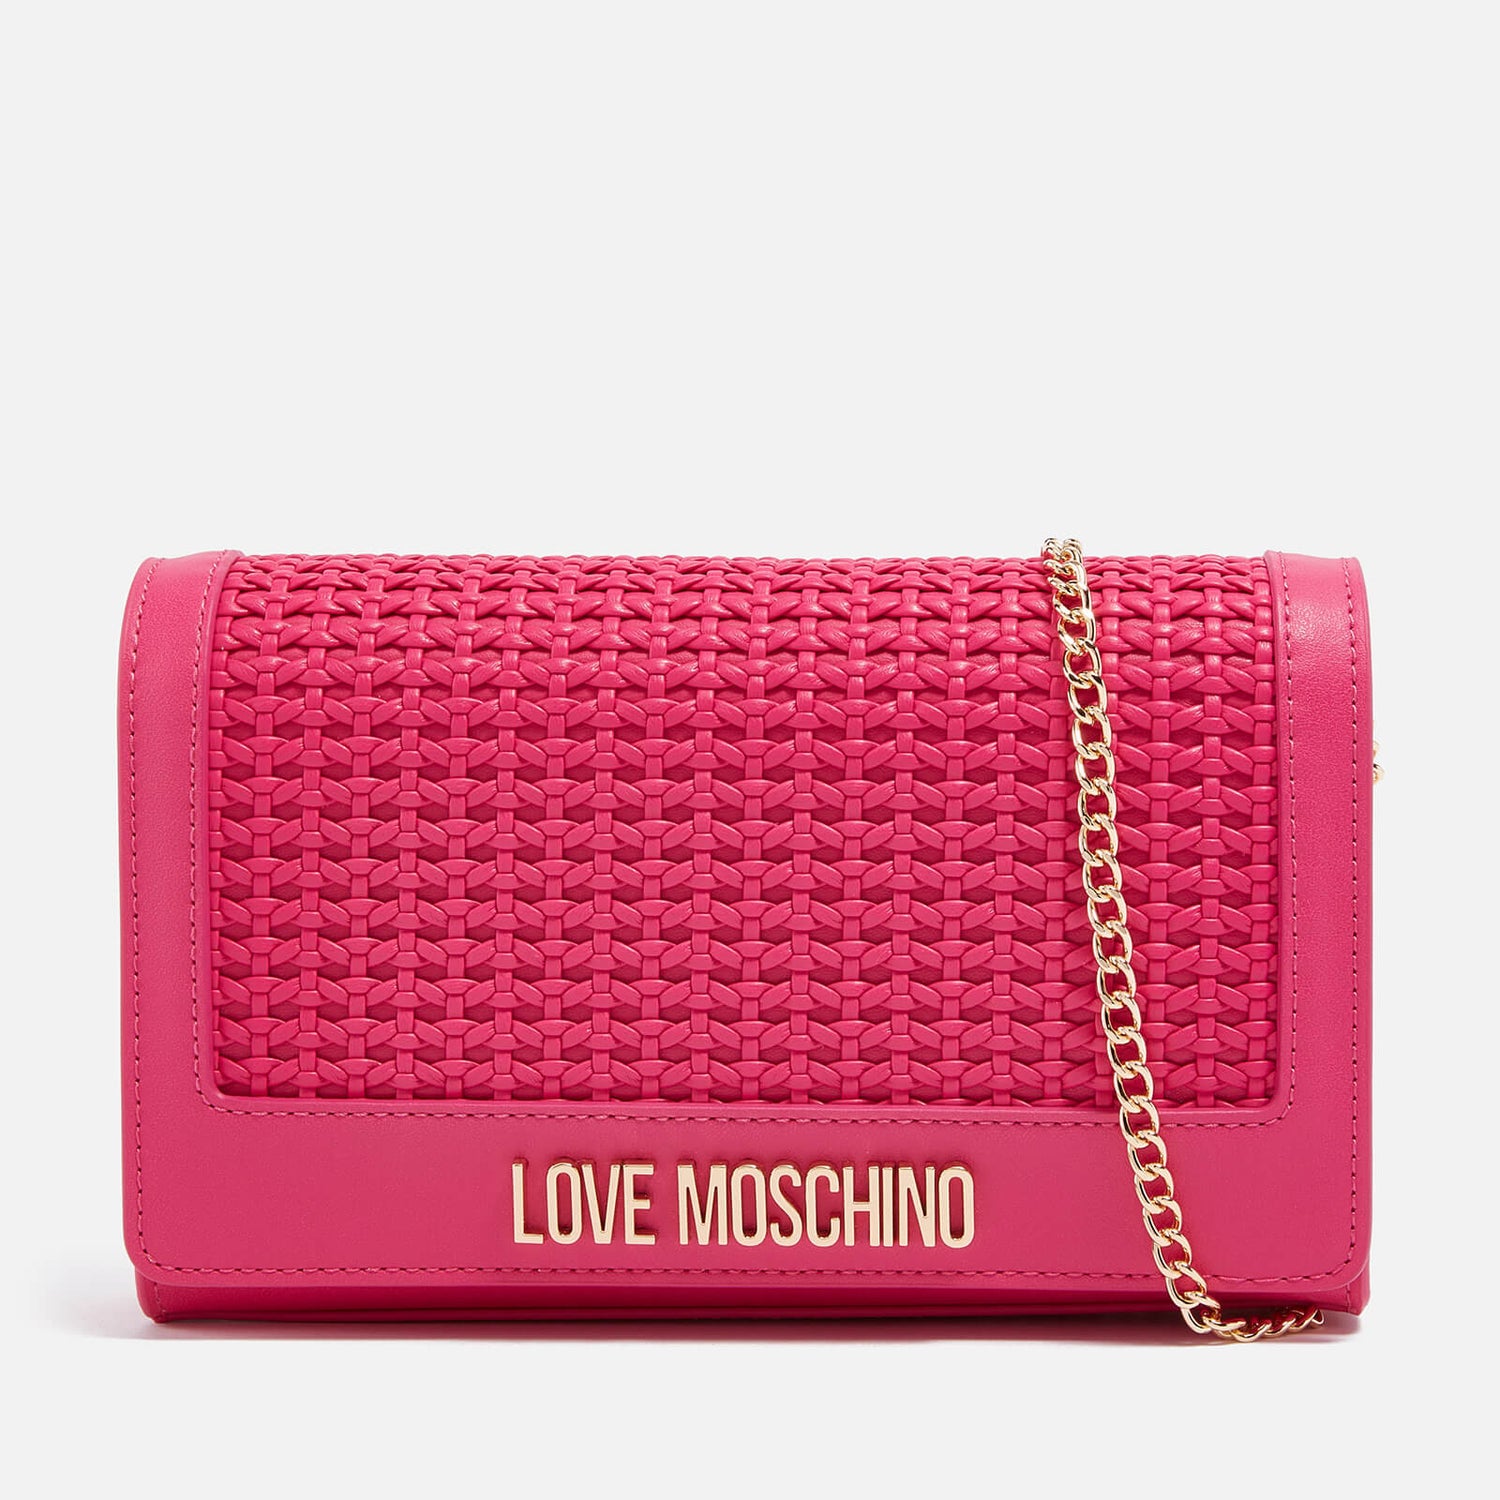 Love Moschino Knots Chain Faux Leather Crossbody Bag